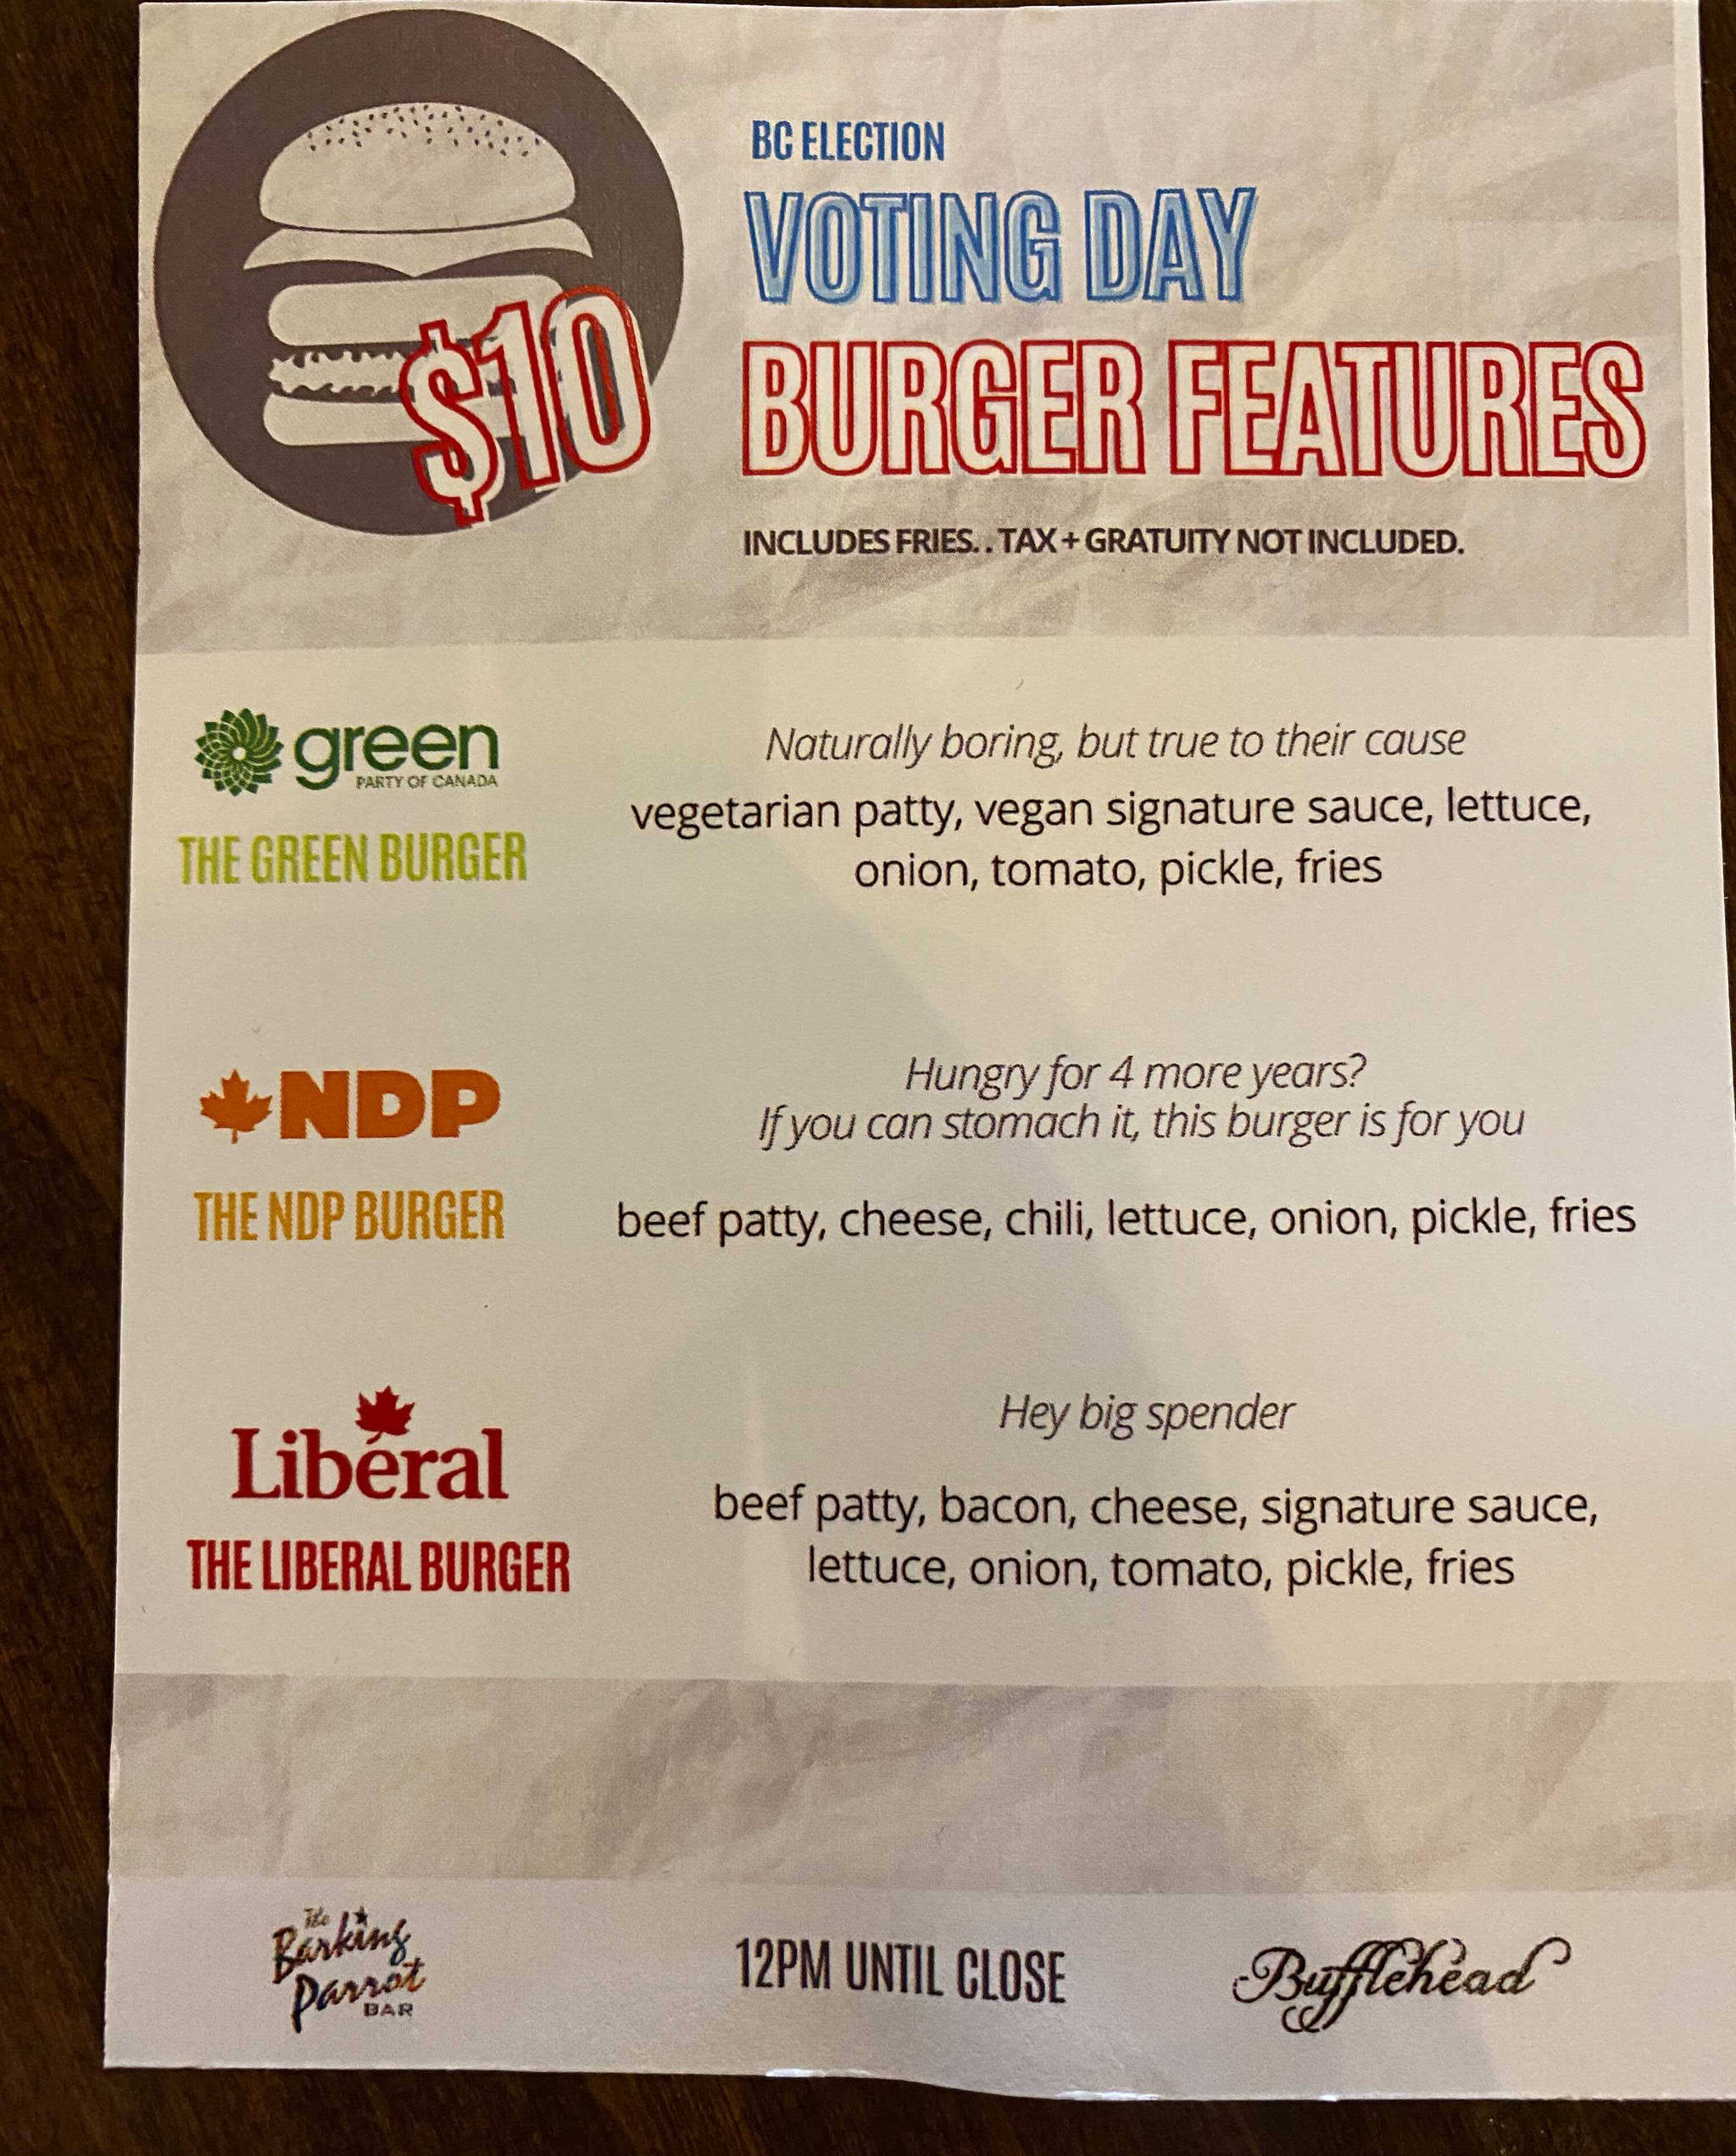 Here's the voting burger menu at the Barking Parrot in Penticton.